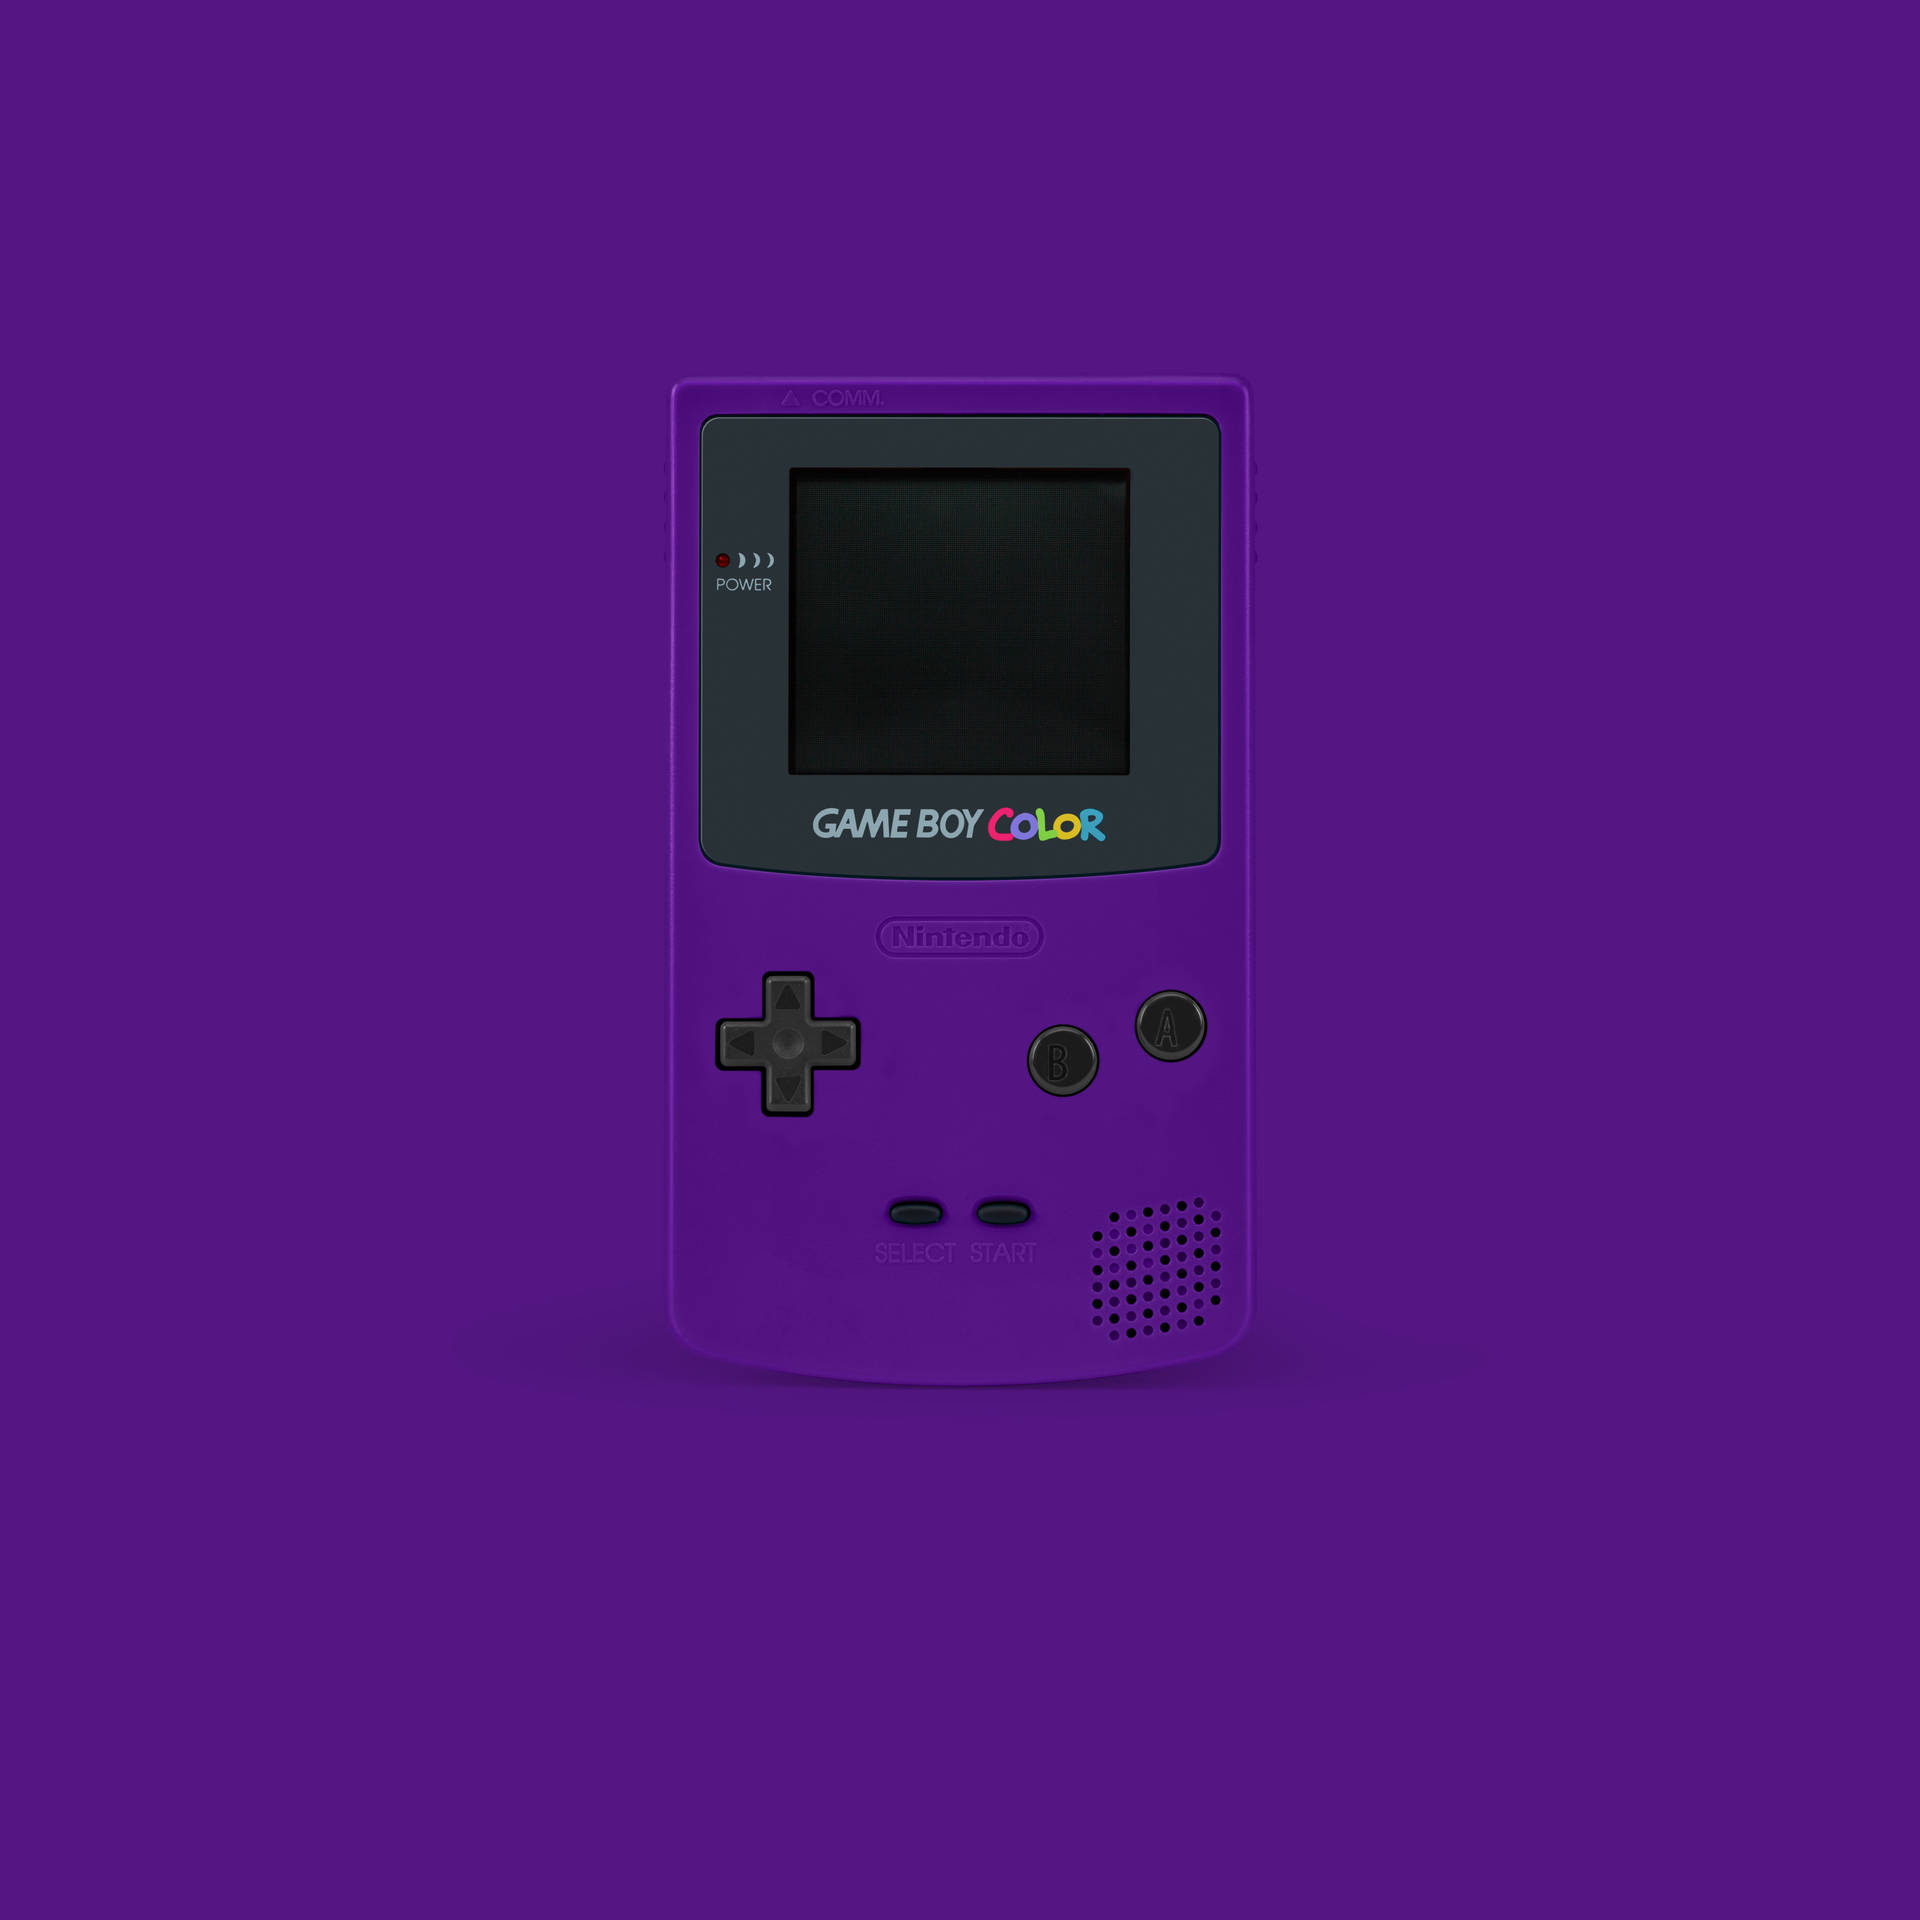 Nintendo 6000X6000 Wallpaper and Background Image